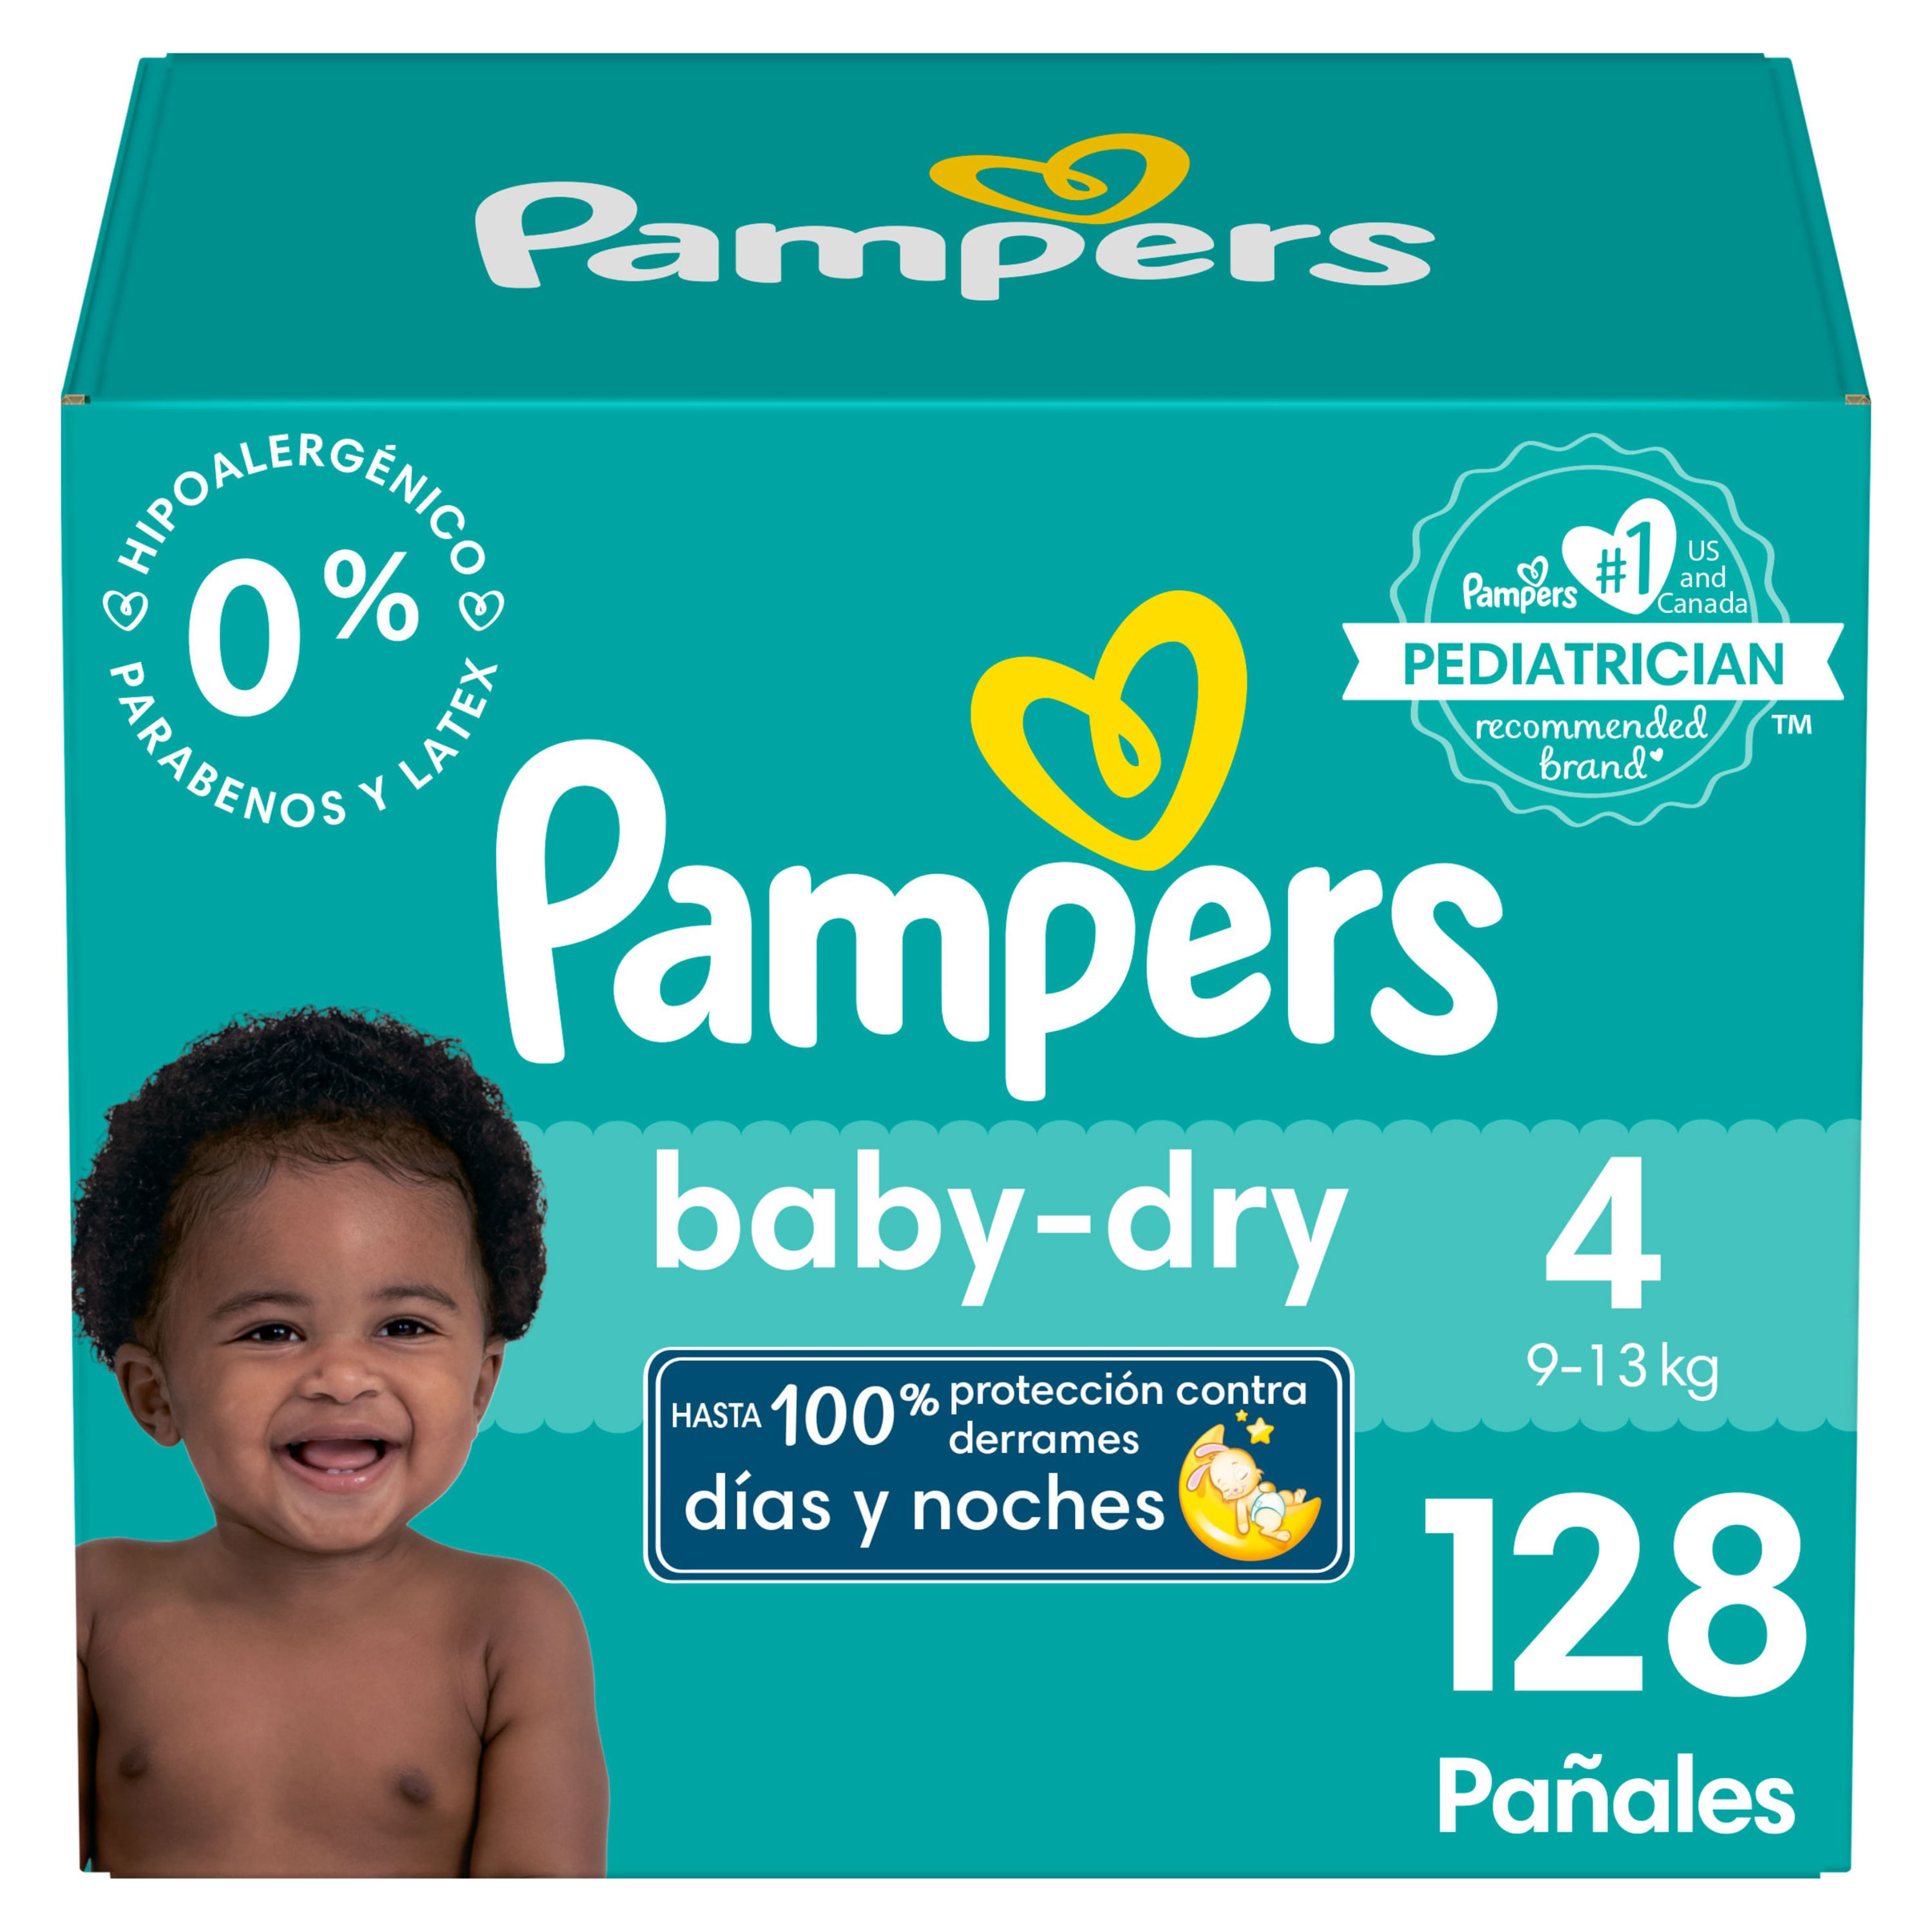 Pa-ales-Pampers-Baby-Dry-Talla-4-128-Unidades-1-35559